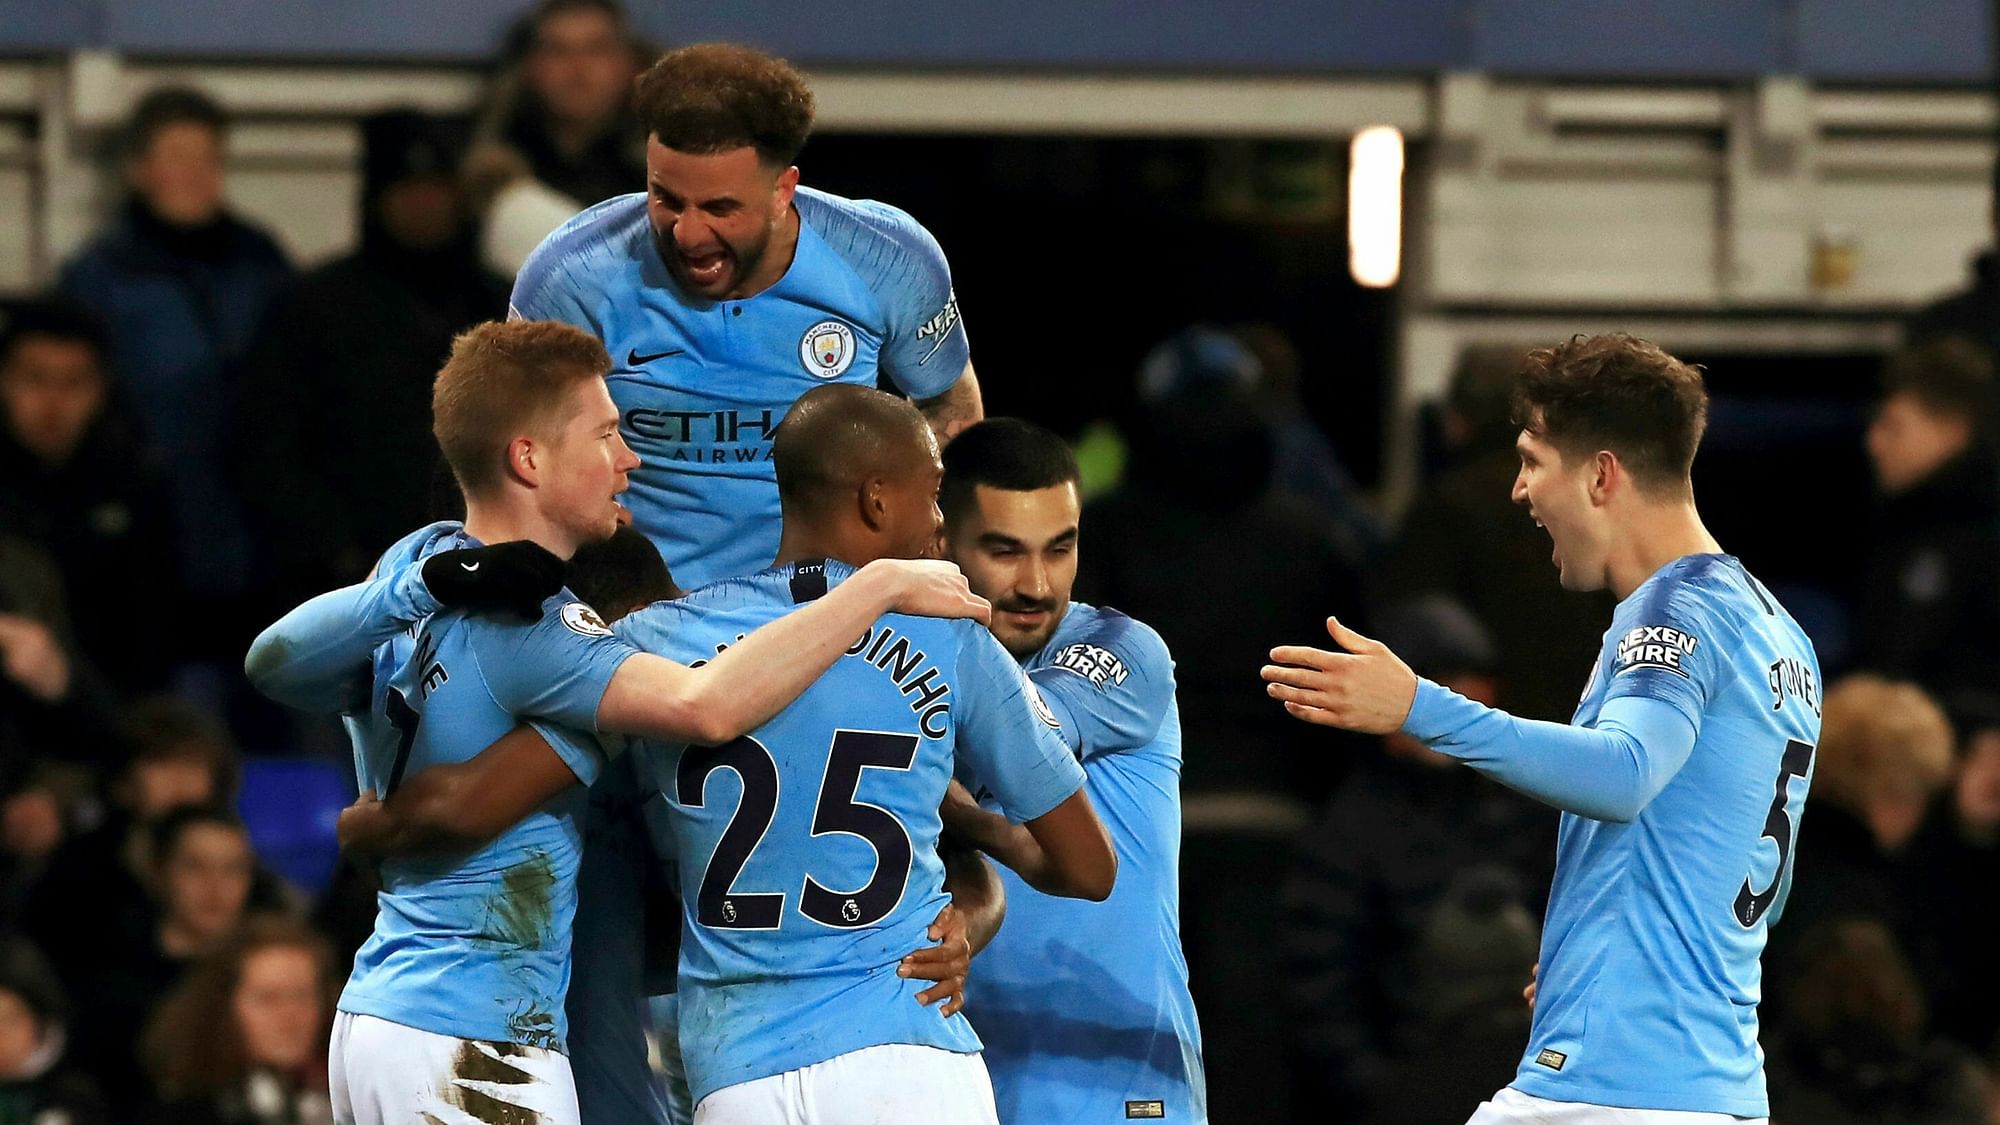 Manchester City players celebrate after Gabriel Jesus (hidden) scored the second goal in their 2-0 win against Everton.